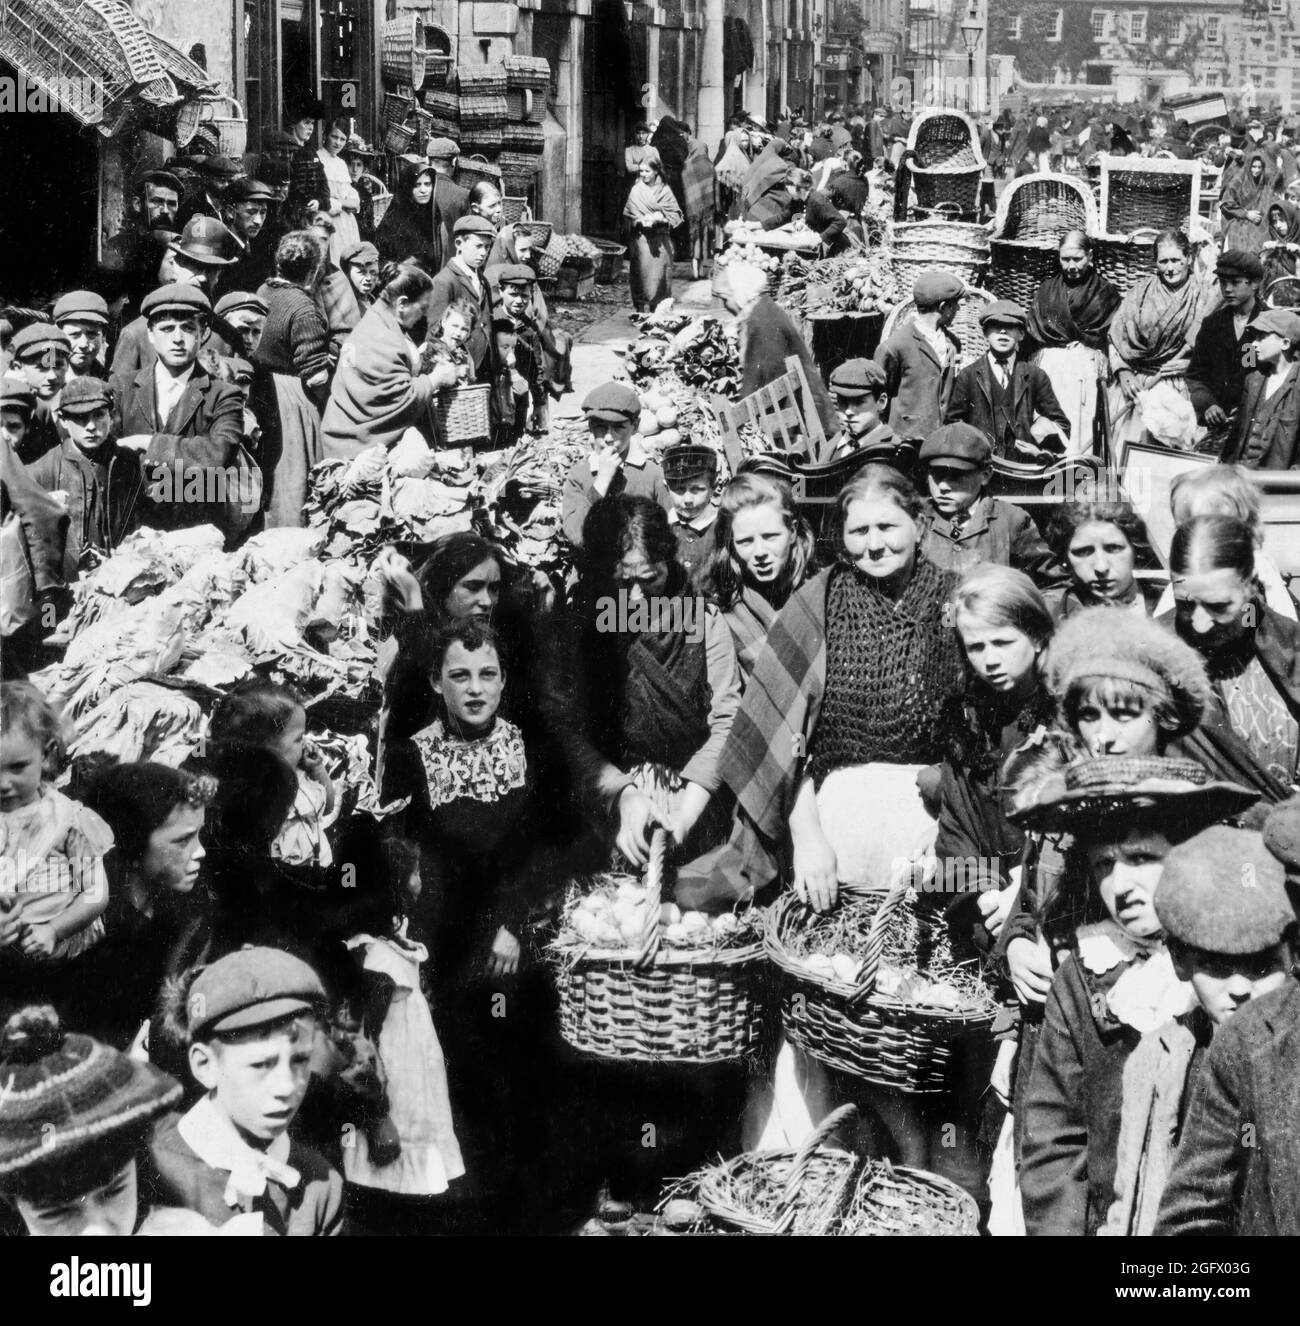 An early 20th century mass portrait of vendors, customers and children in Paddy's Market, Coal Quay, Cork City, Ireland Stock Photo